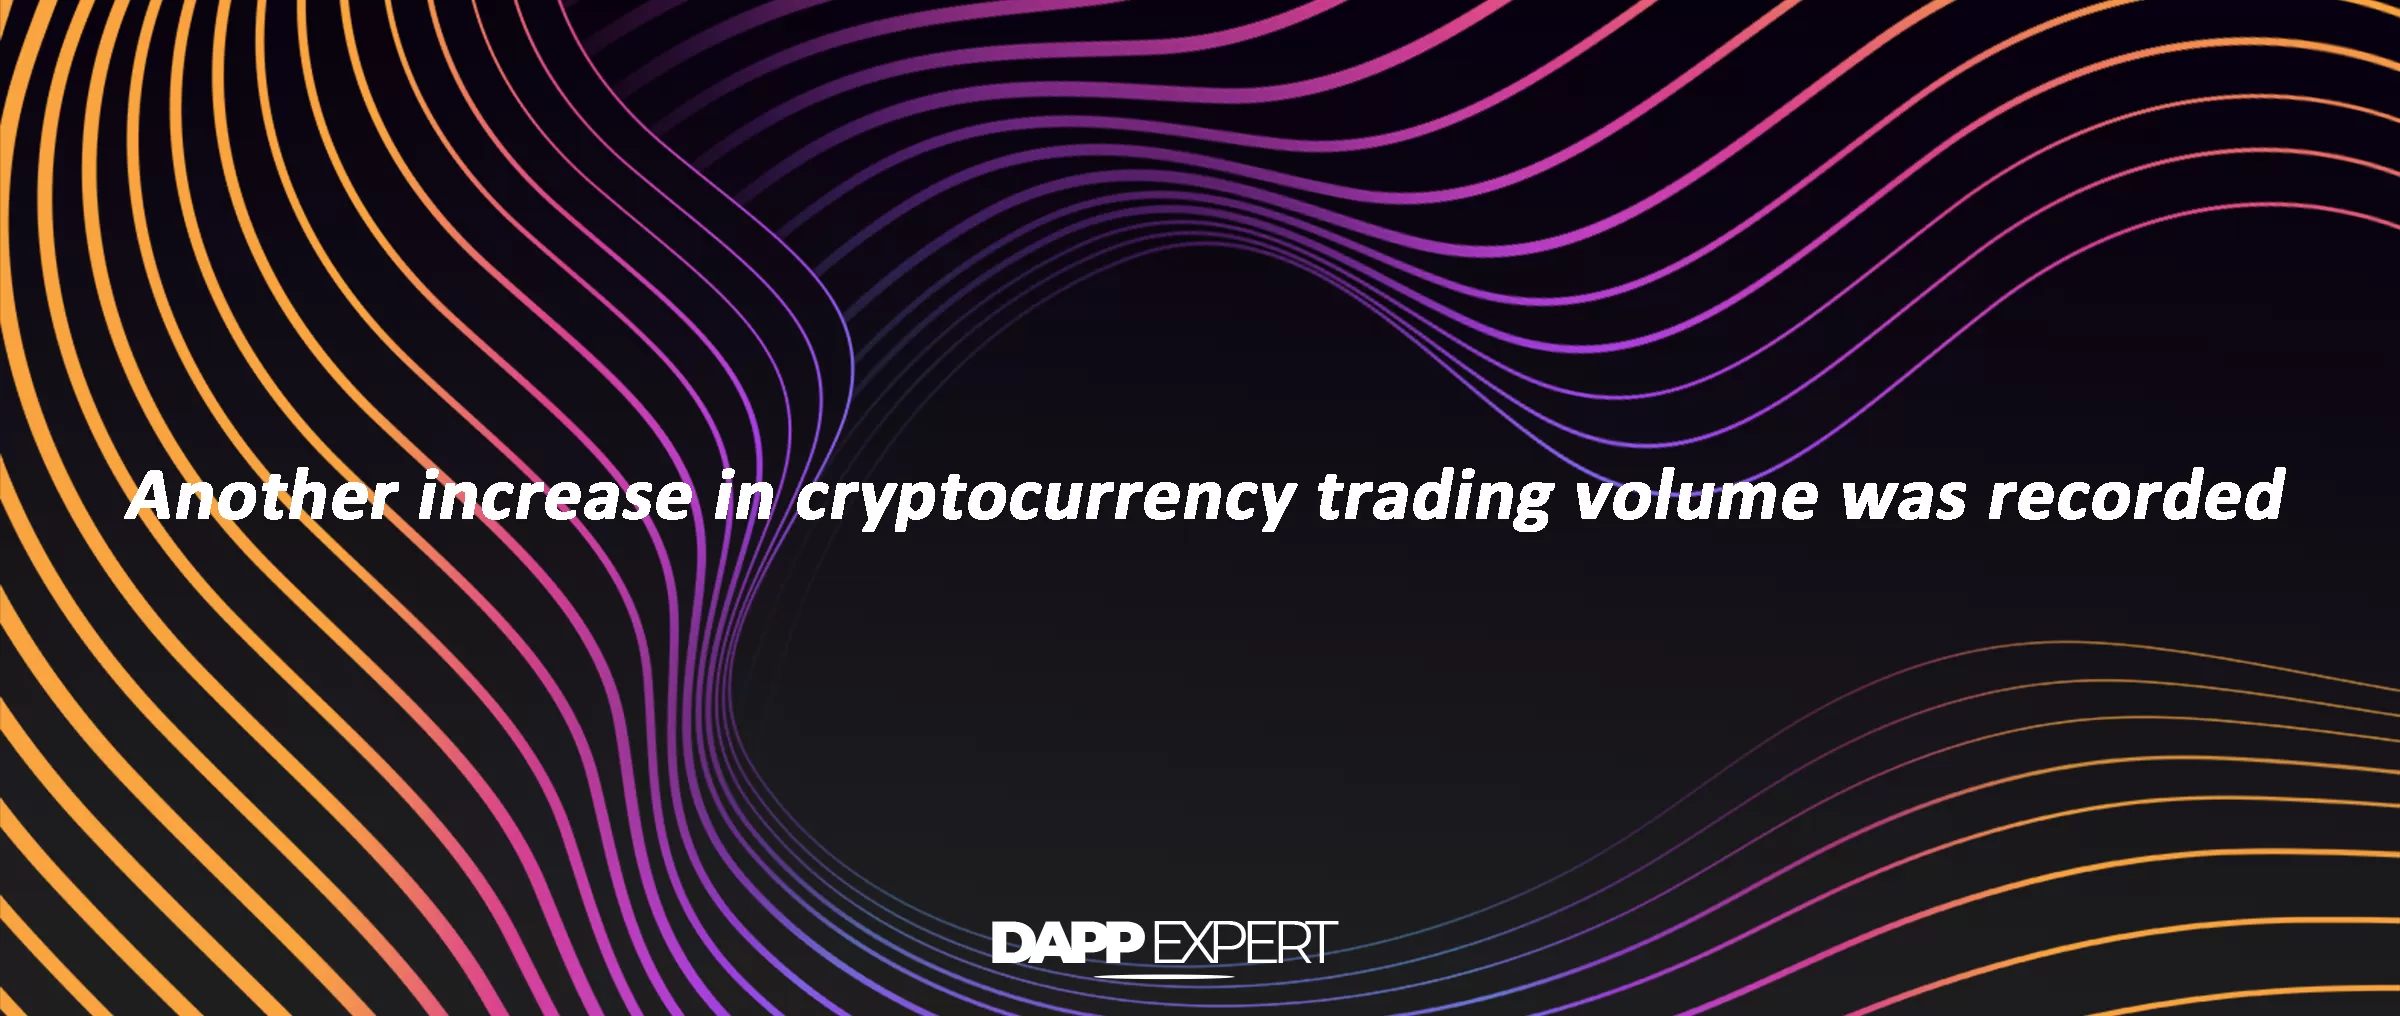 Another increase in cryptocurrency trading volume was recorded